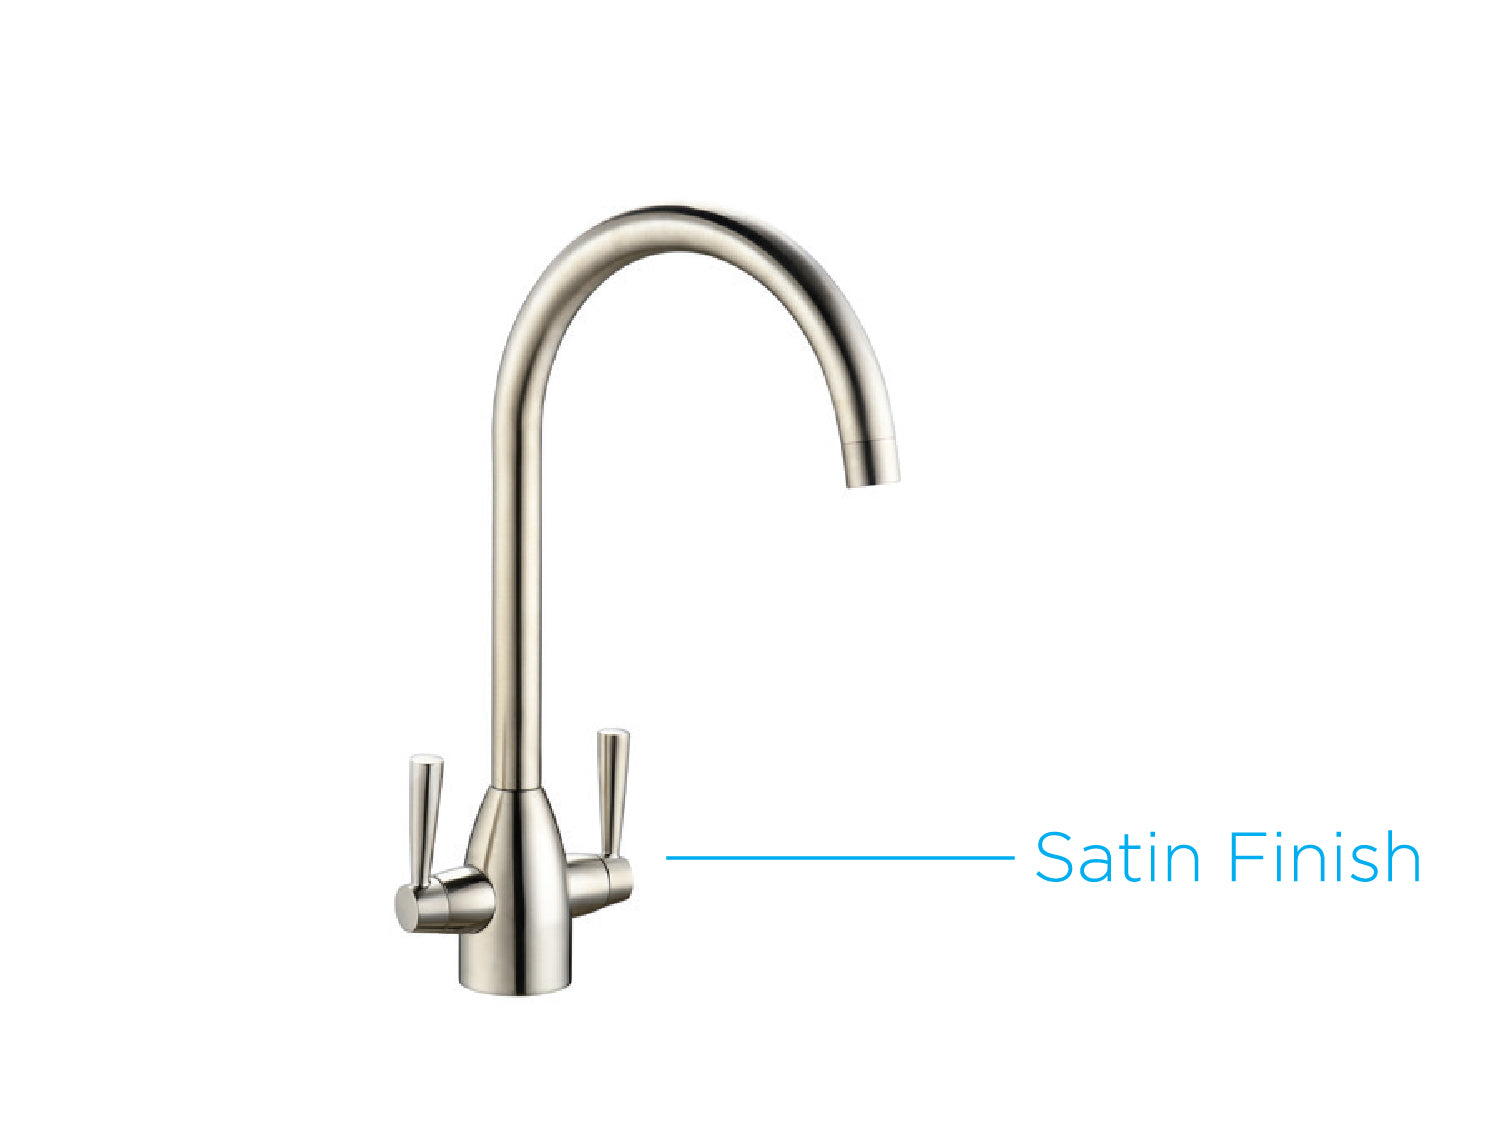 Best in Style Two Lever Kitchen Mixer Taps with Classic Swan Neck Spout Design Finished in Satin